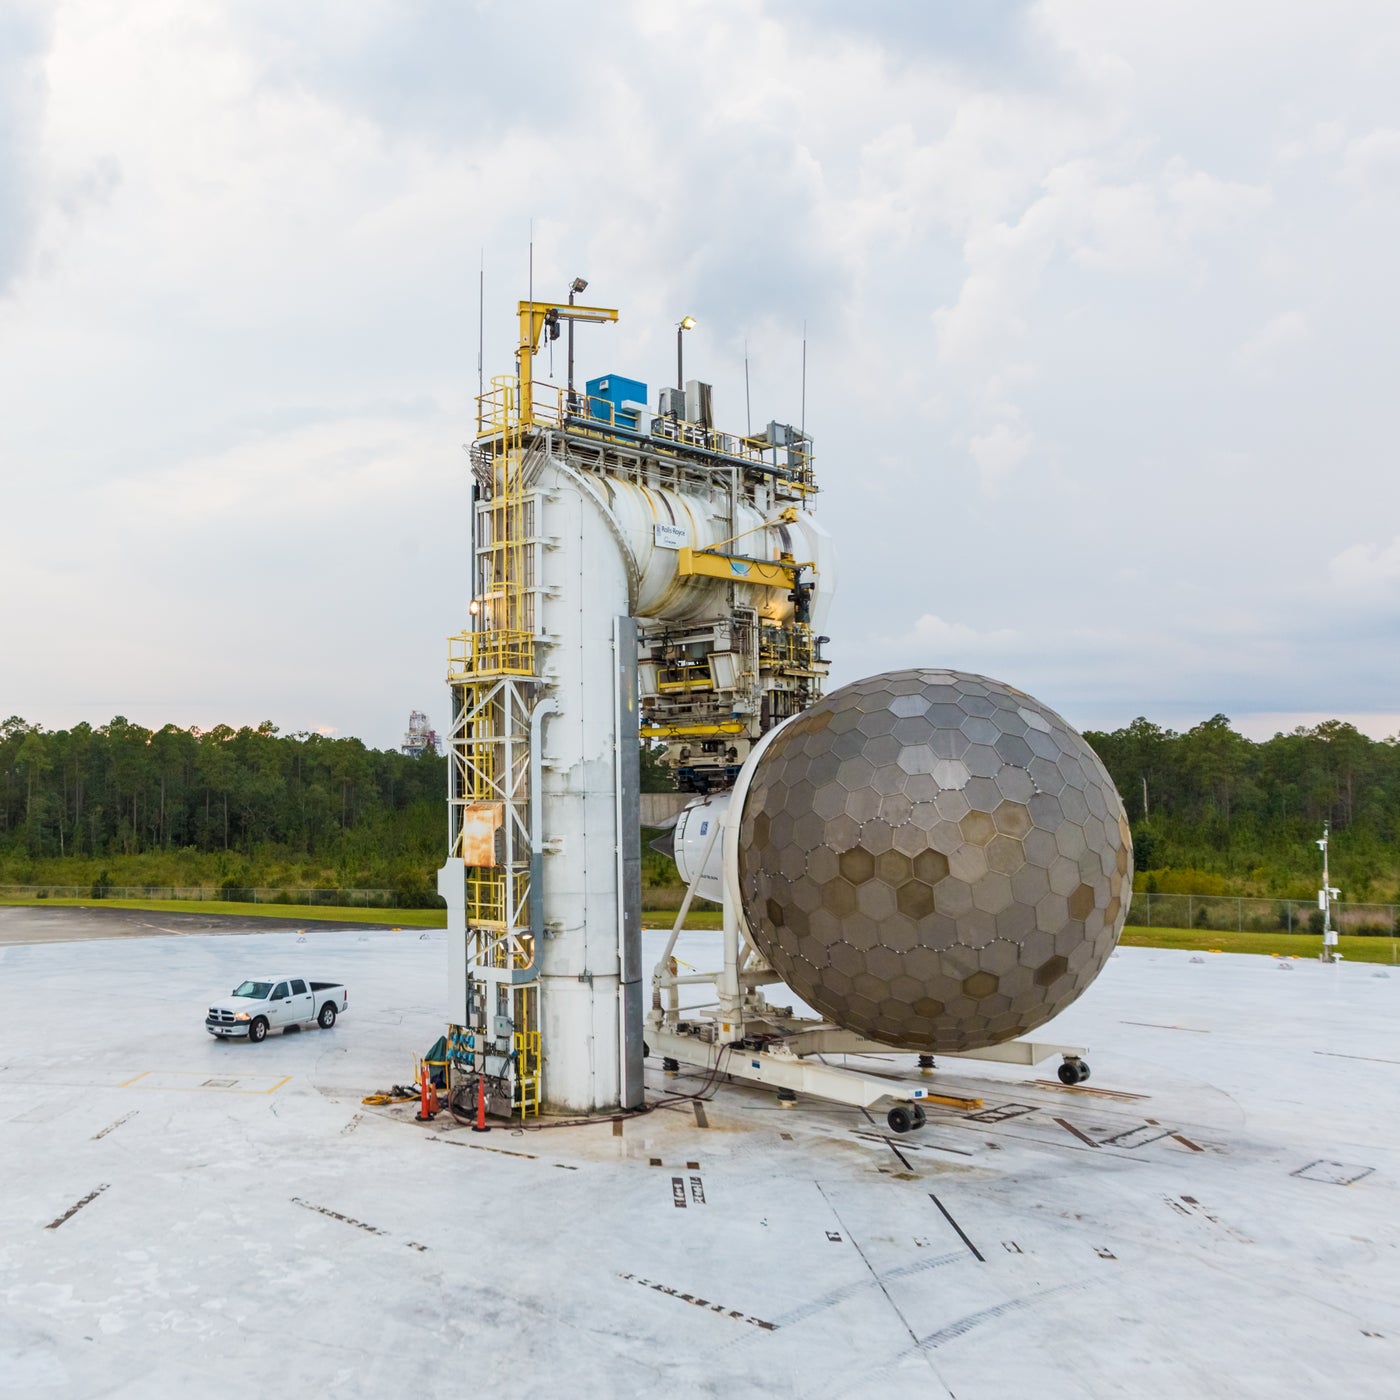 Noise testing facility at NASA's Stennis Space Center